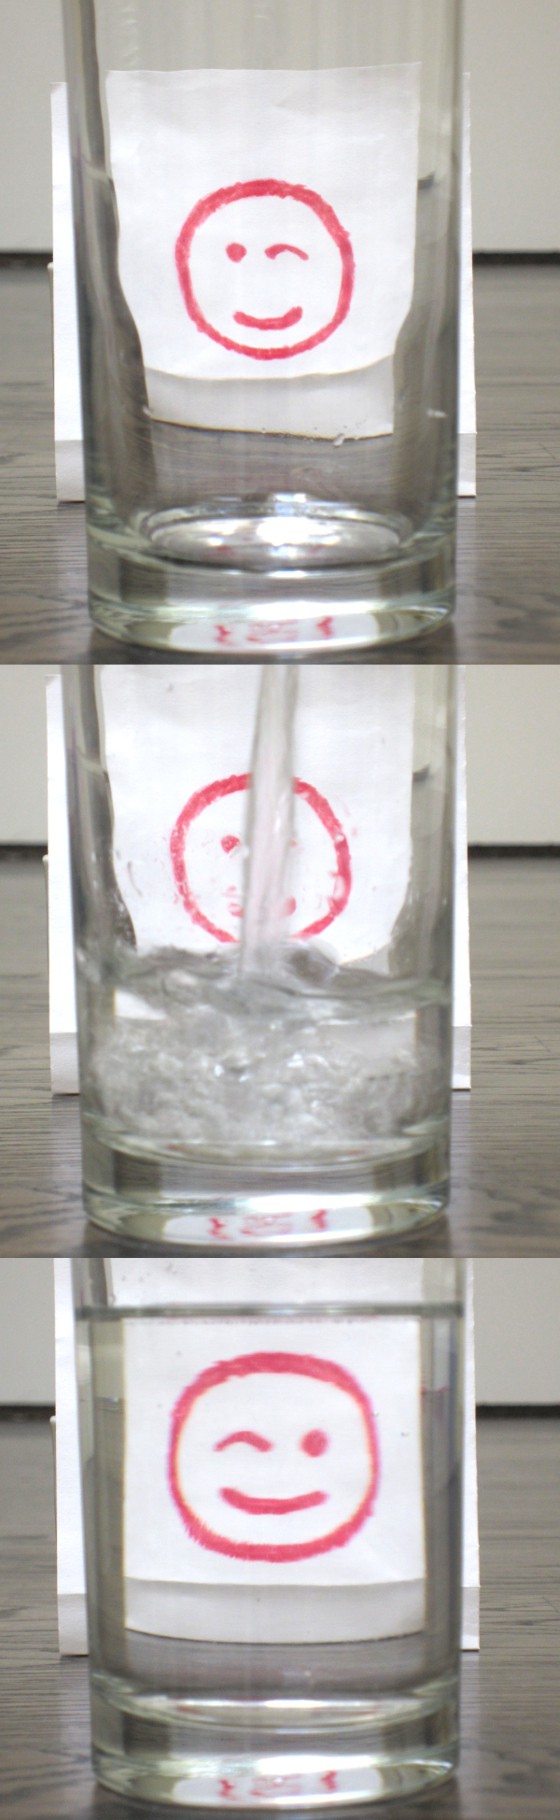 smiling face behind glass, water poured into the glass, reversed smiling face behind glass full of water